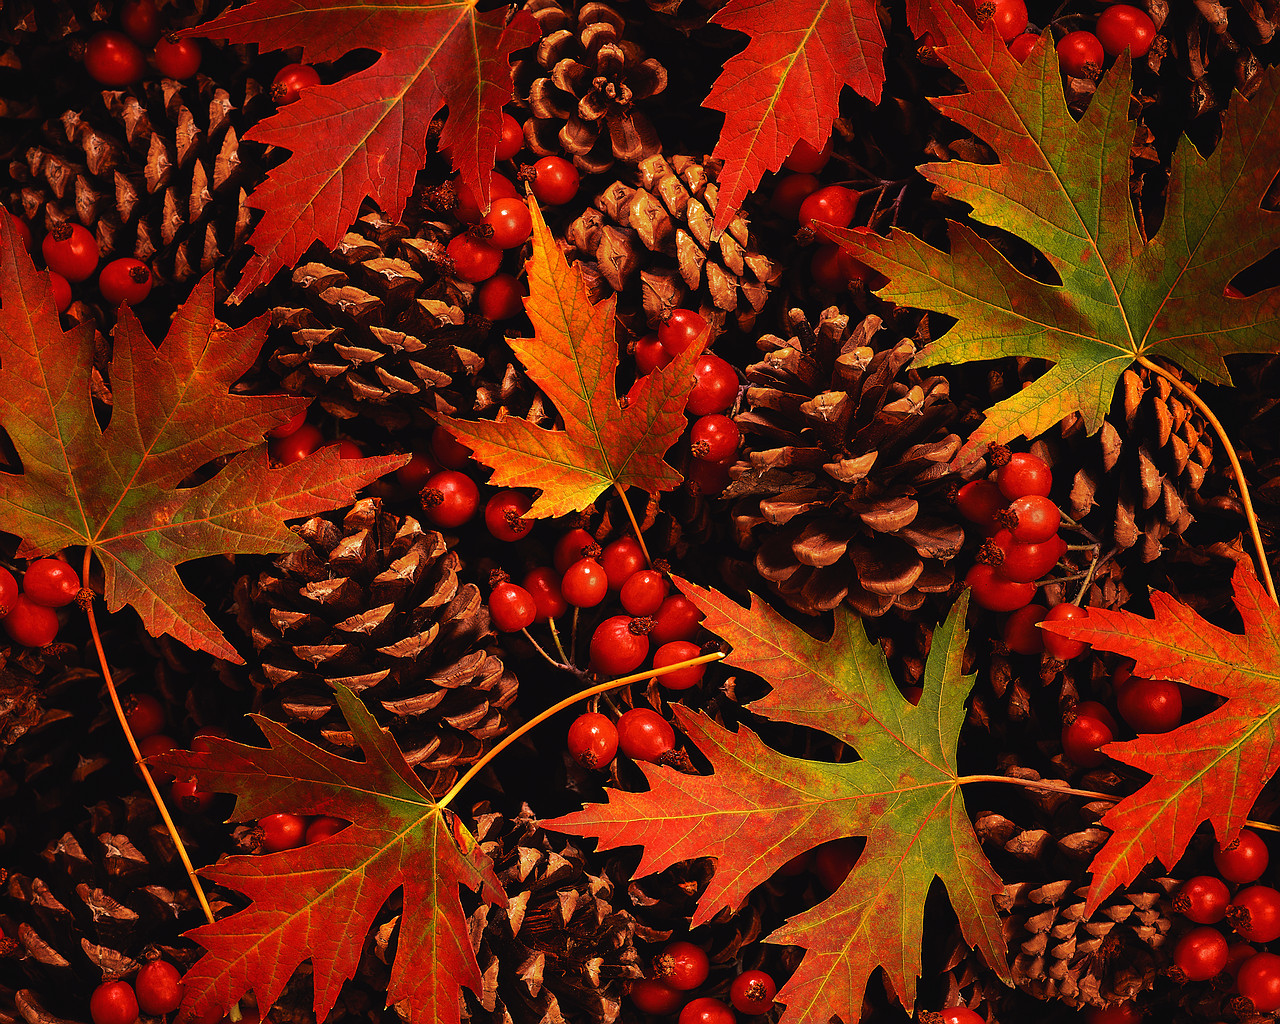 On Some Hot Cider And Enjoy The Colors Of Fall With Your Little One